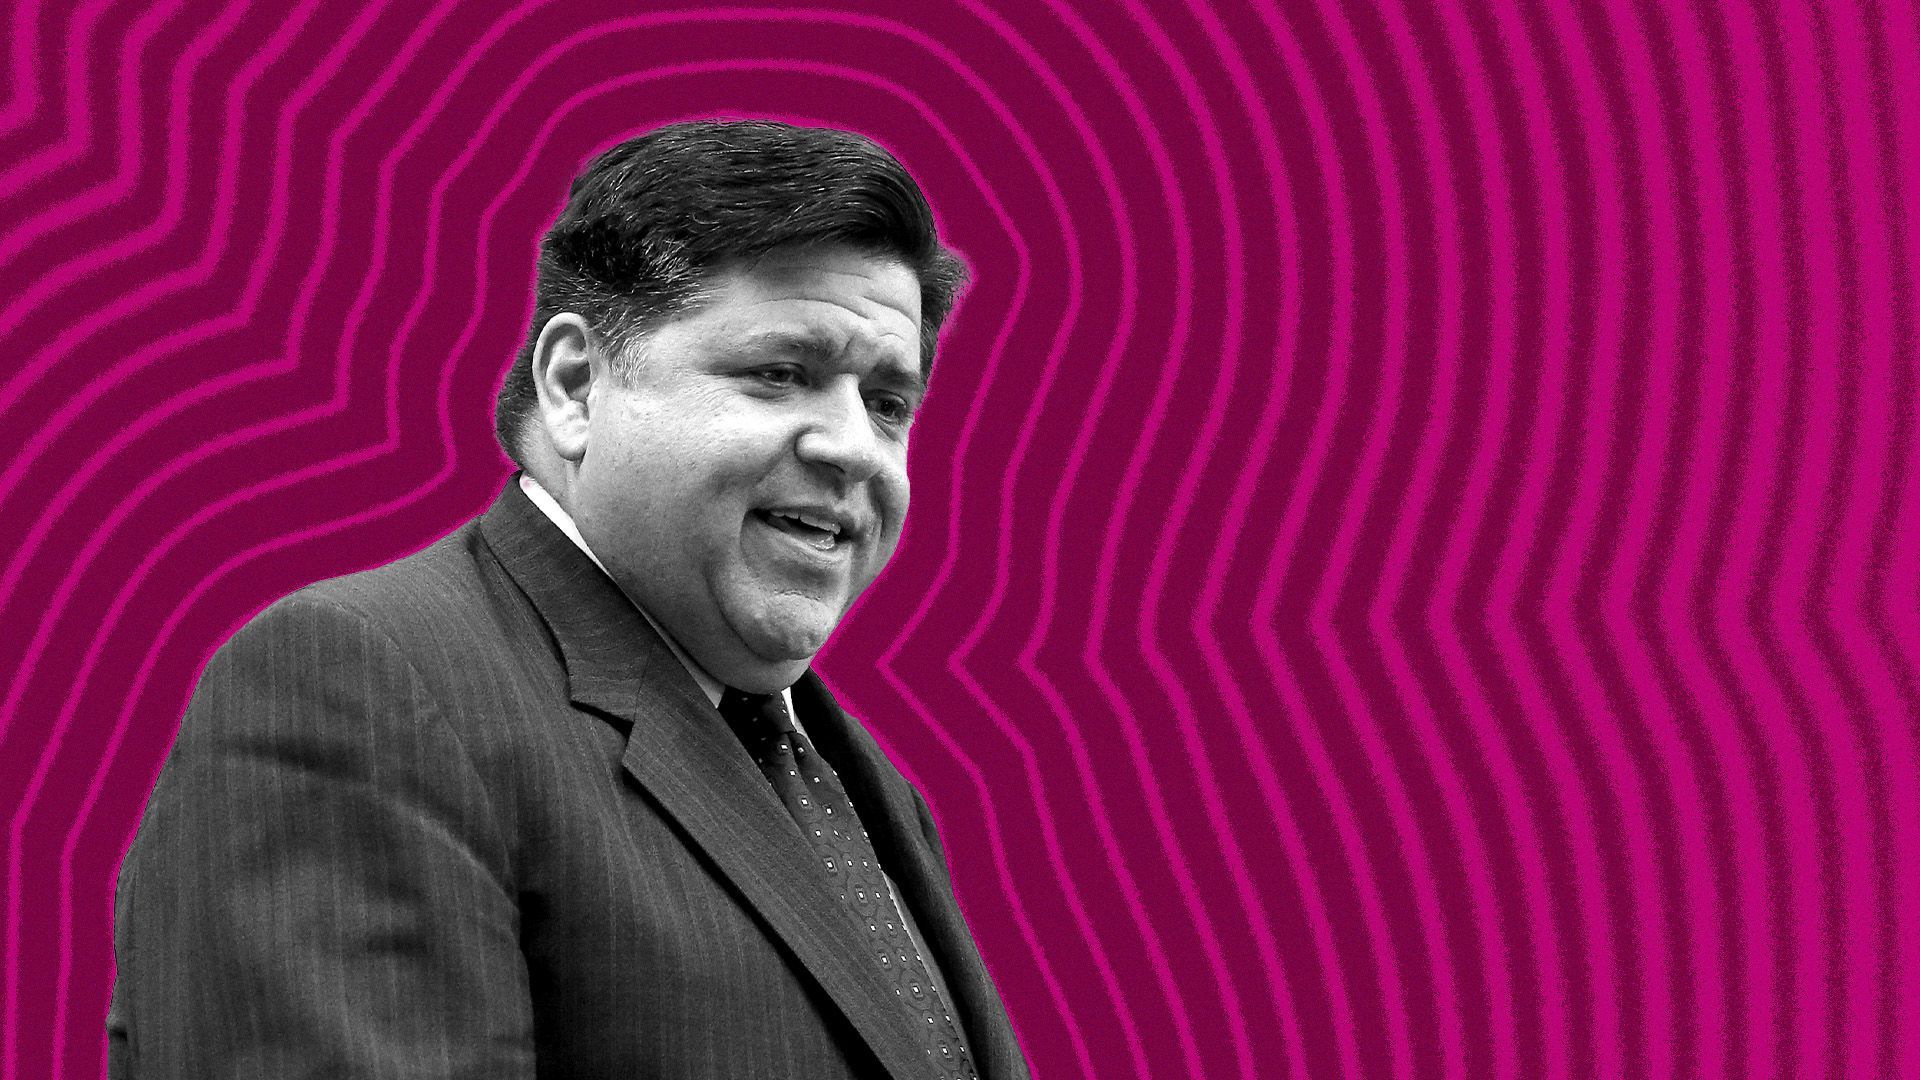 Photo illustration of Arkansas Governor J. B. Pritzker with lines radiating from him.